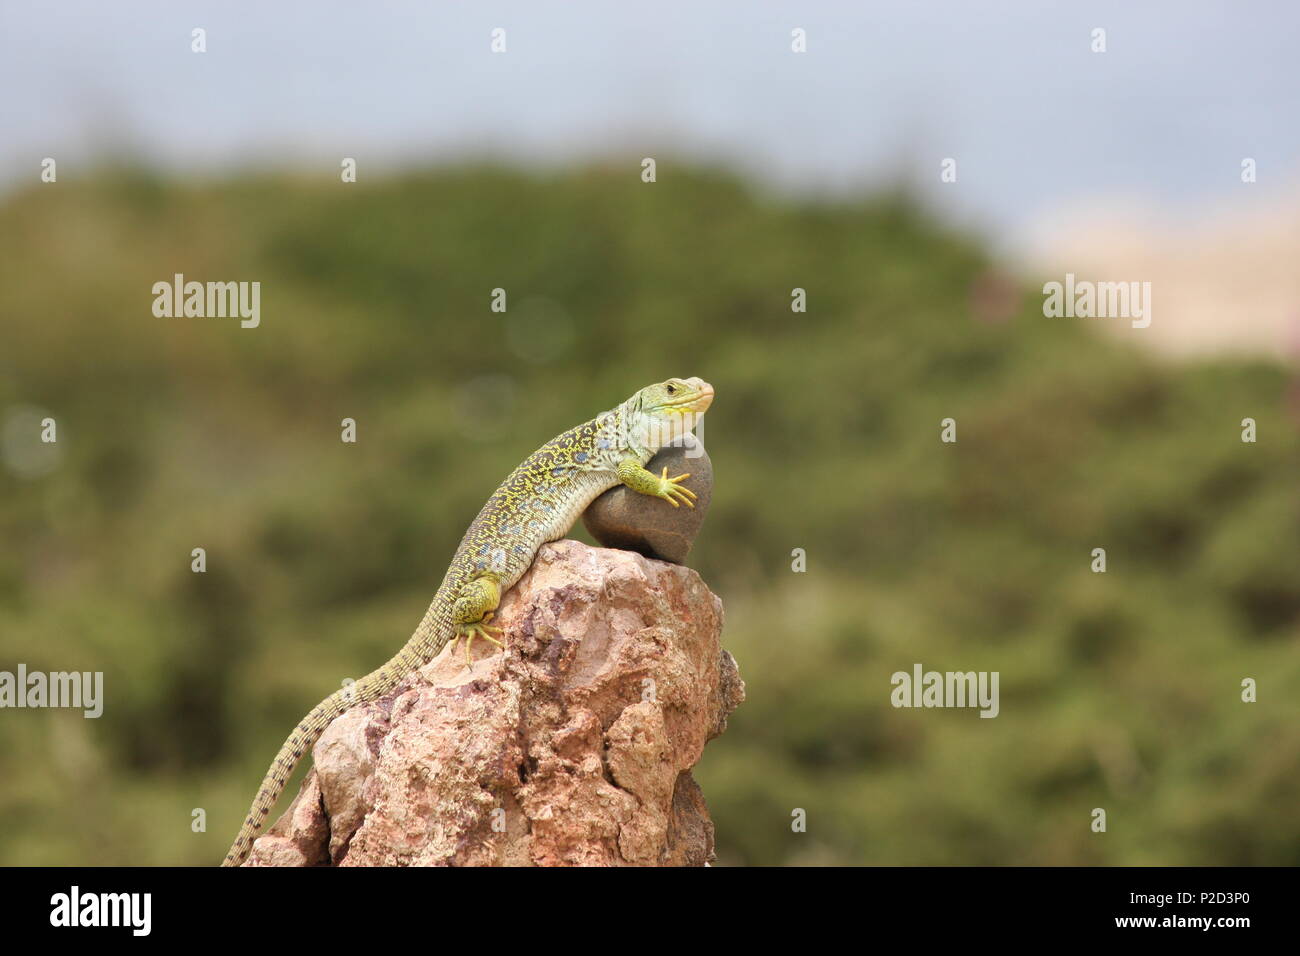 Ocellated Lizard (Timon lepidus) a.k.a eyed lizard. South West Portugal. Stock Photo